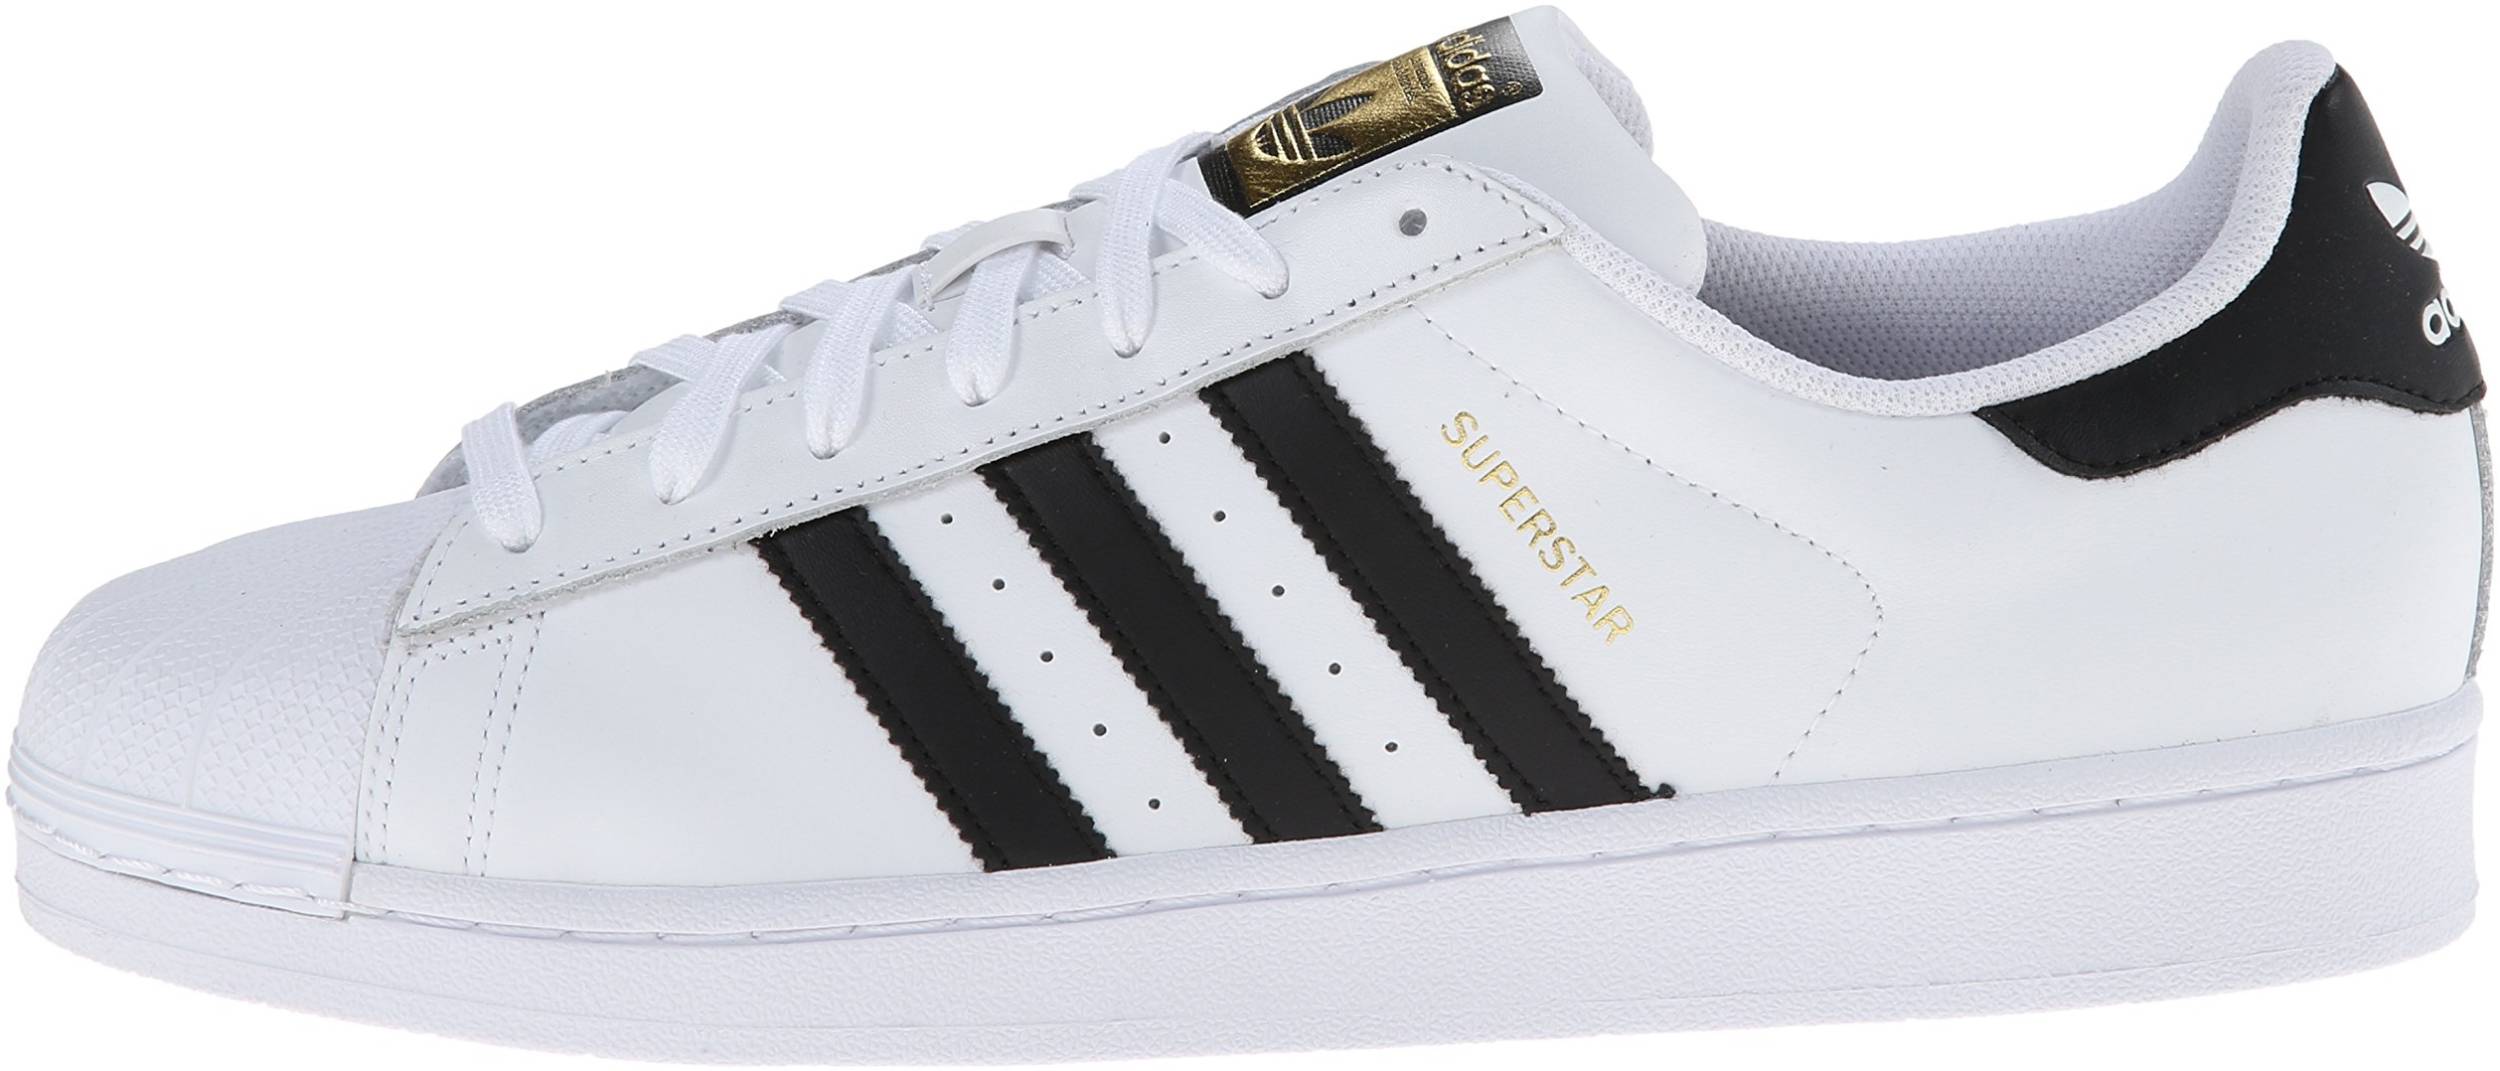 left barbecue mound 80+ colors of Adidas Superstar (from $27) | RunRepeat